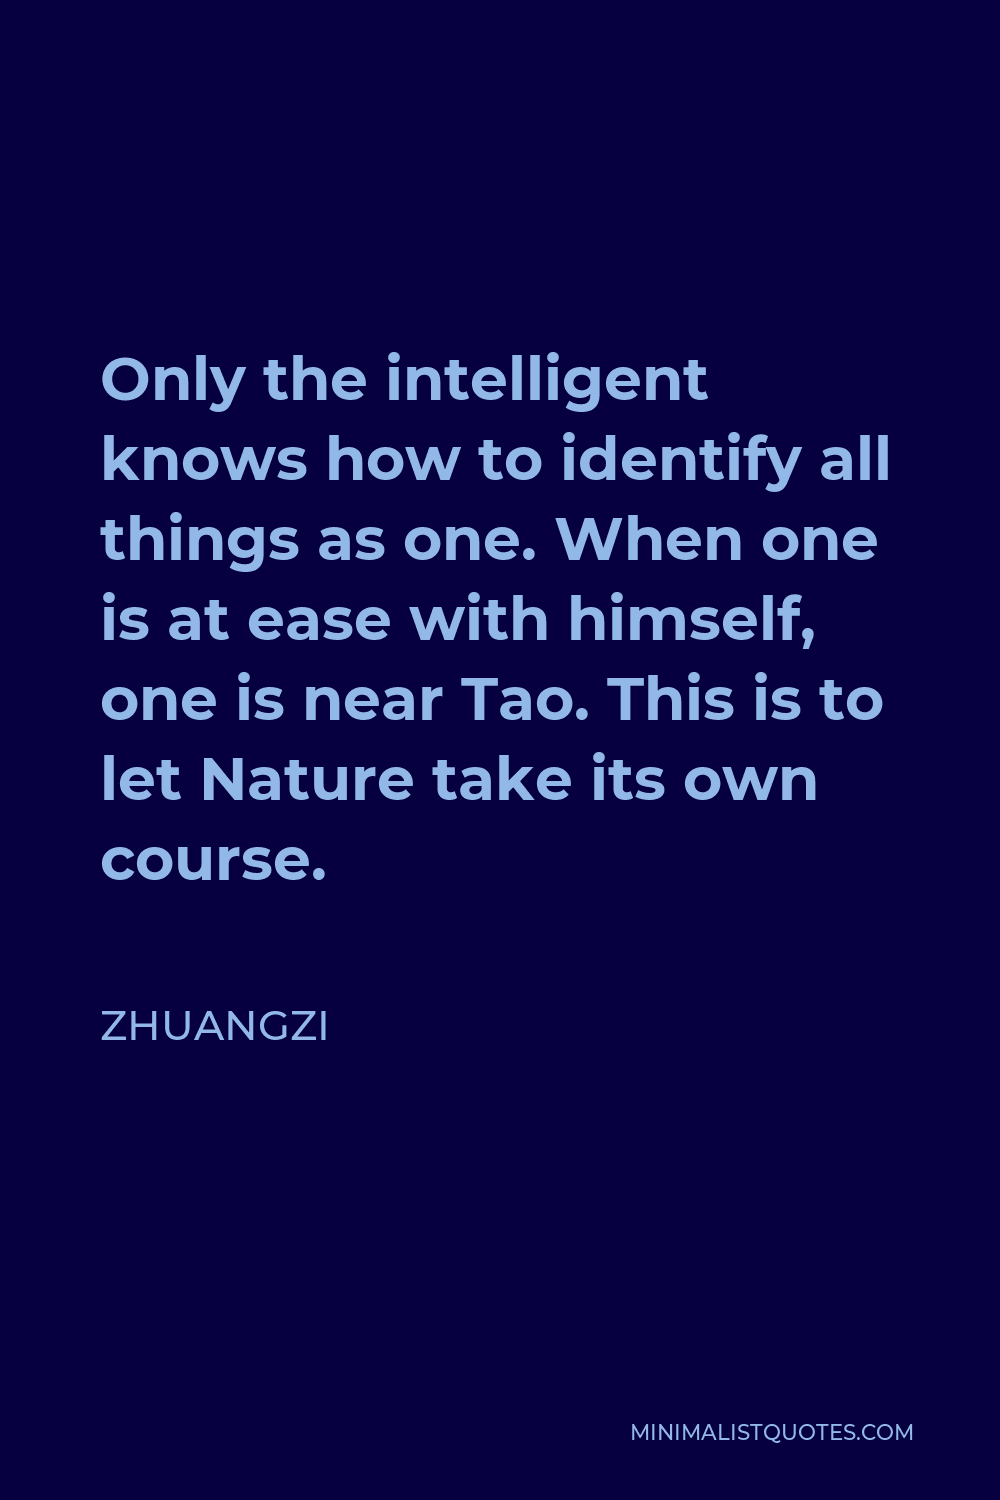 Zhuangzi Quote - Only the intelligent knows how to identify all things as one. When one is at ease with himself, one is near Tao. This is to let Nature take its own course.